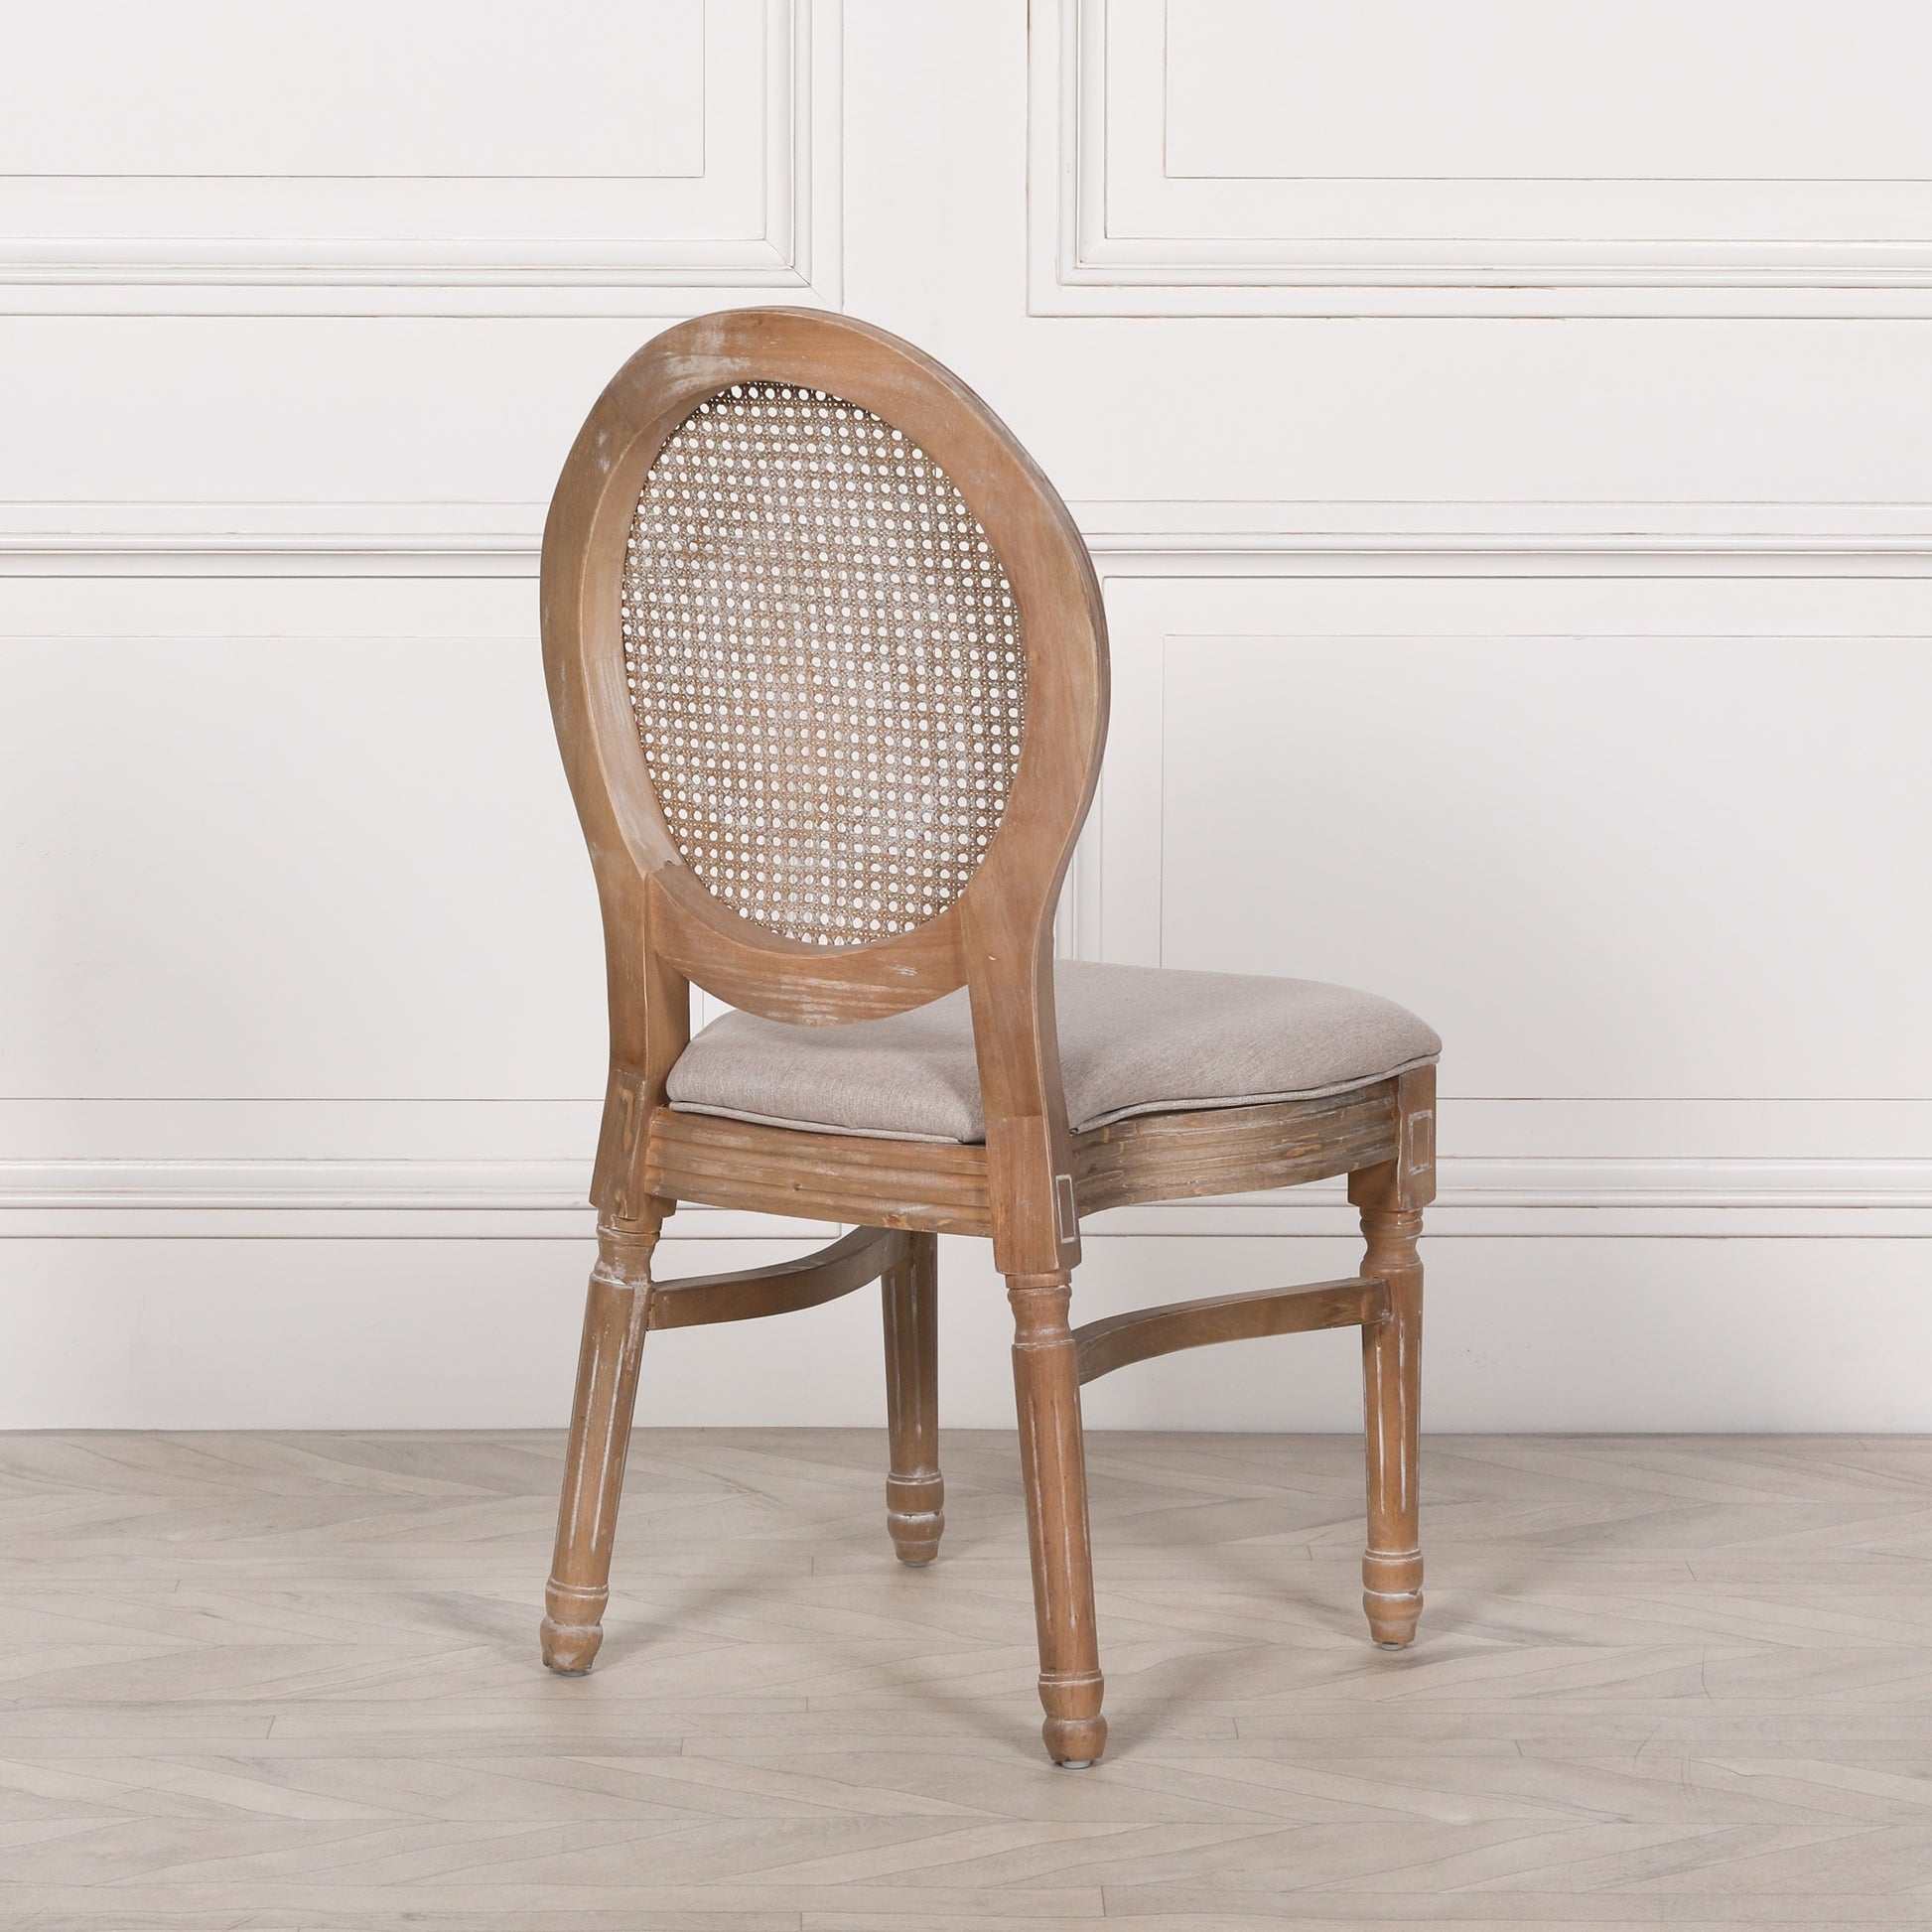 Wooden Louis Upholstered Dining Chair CasaFenix